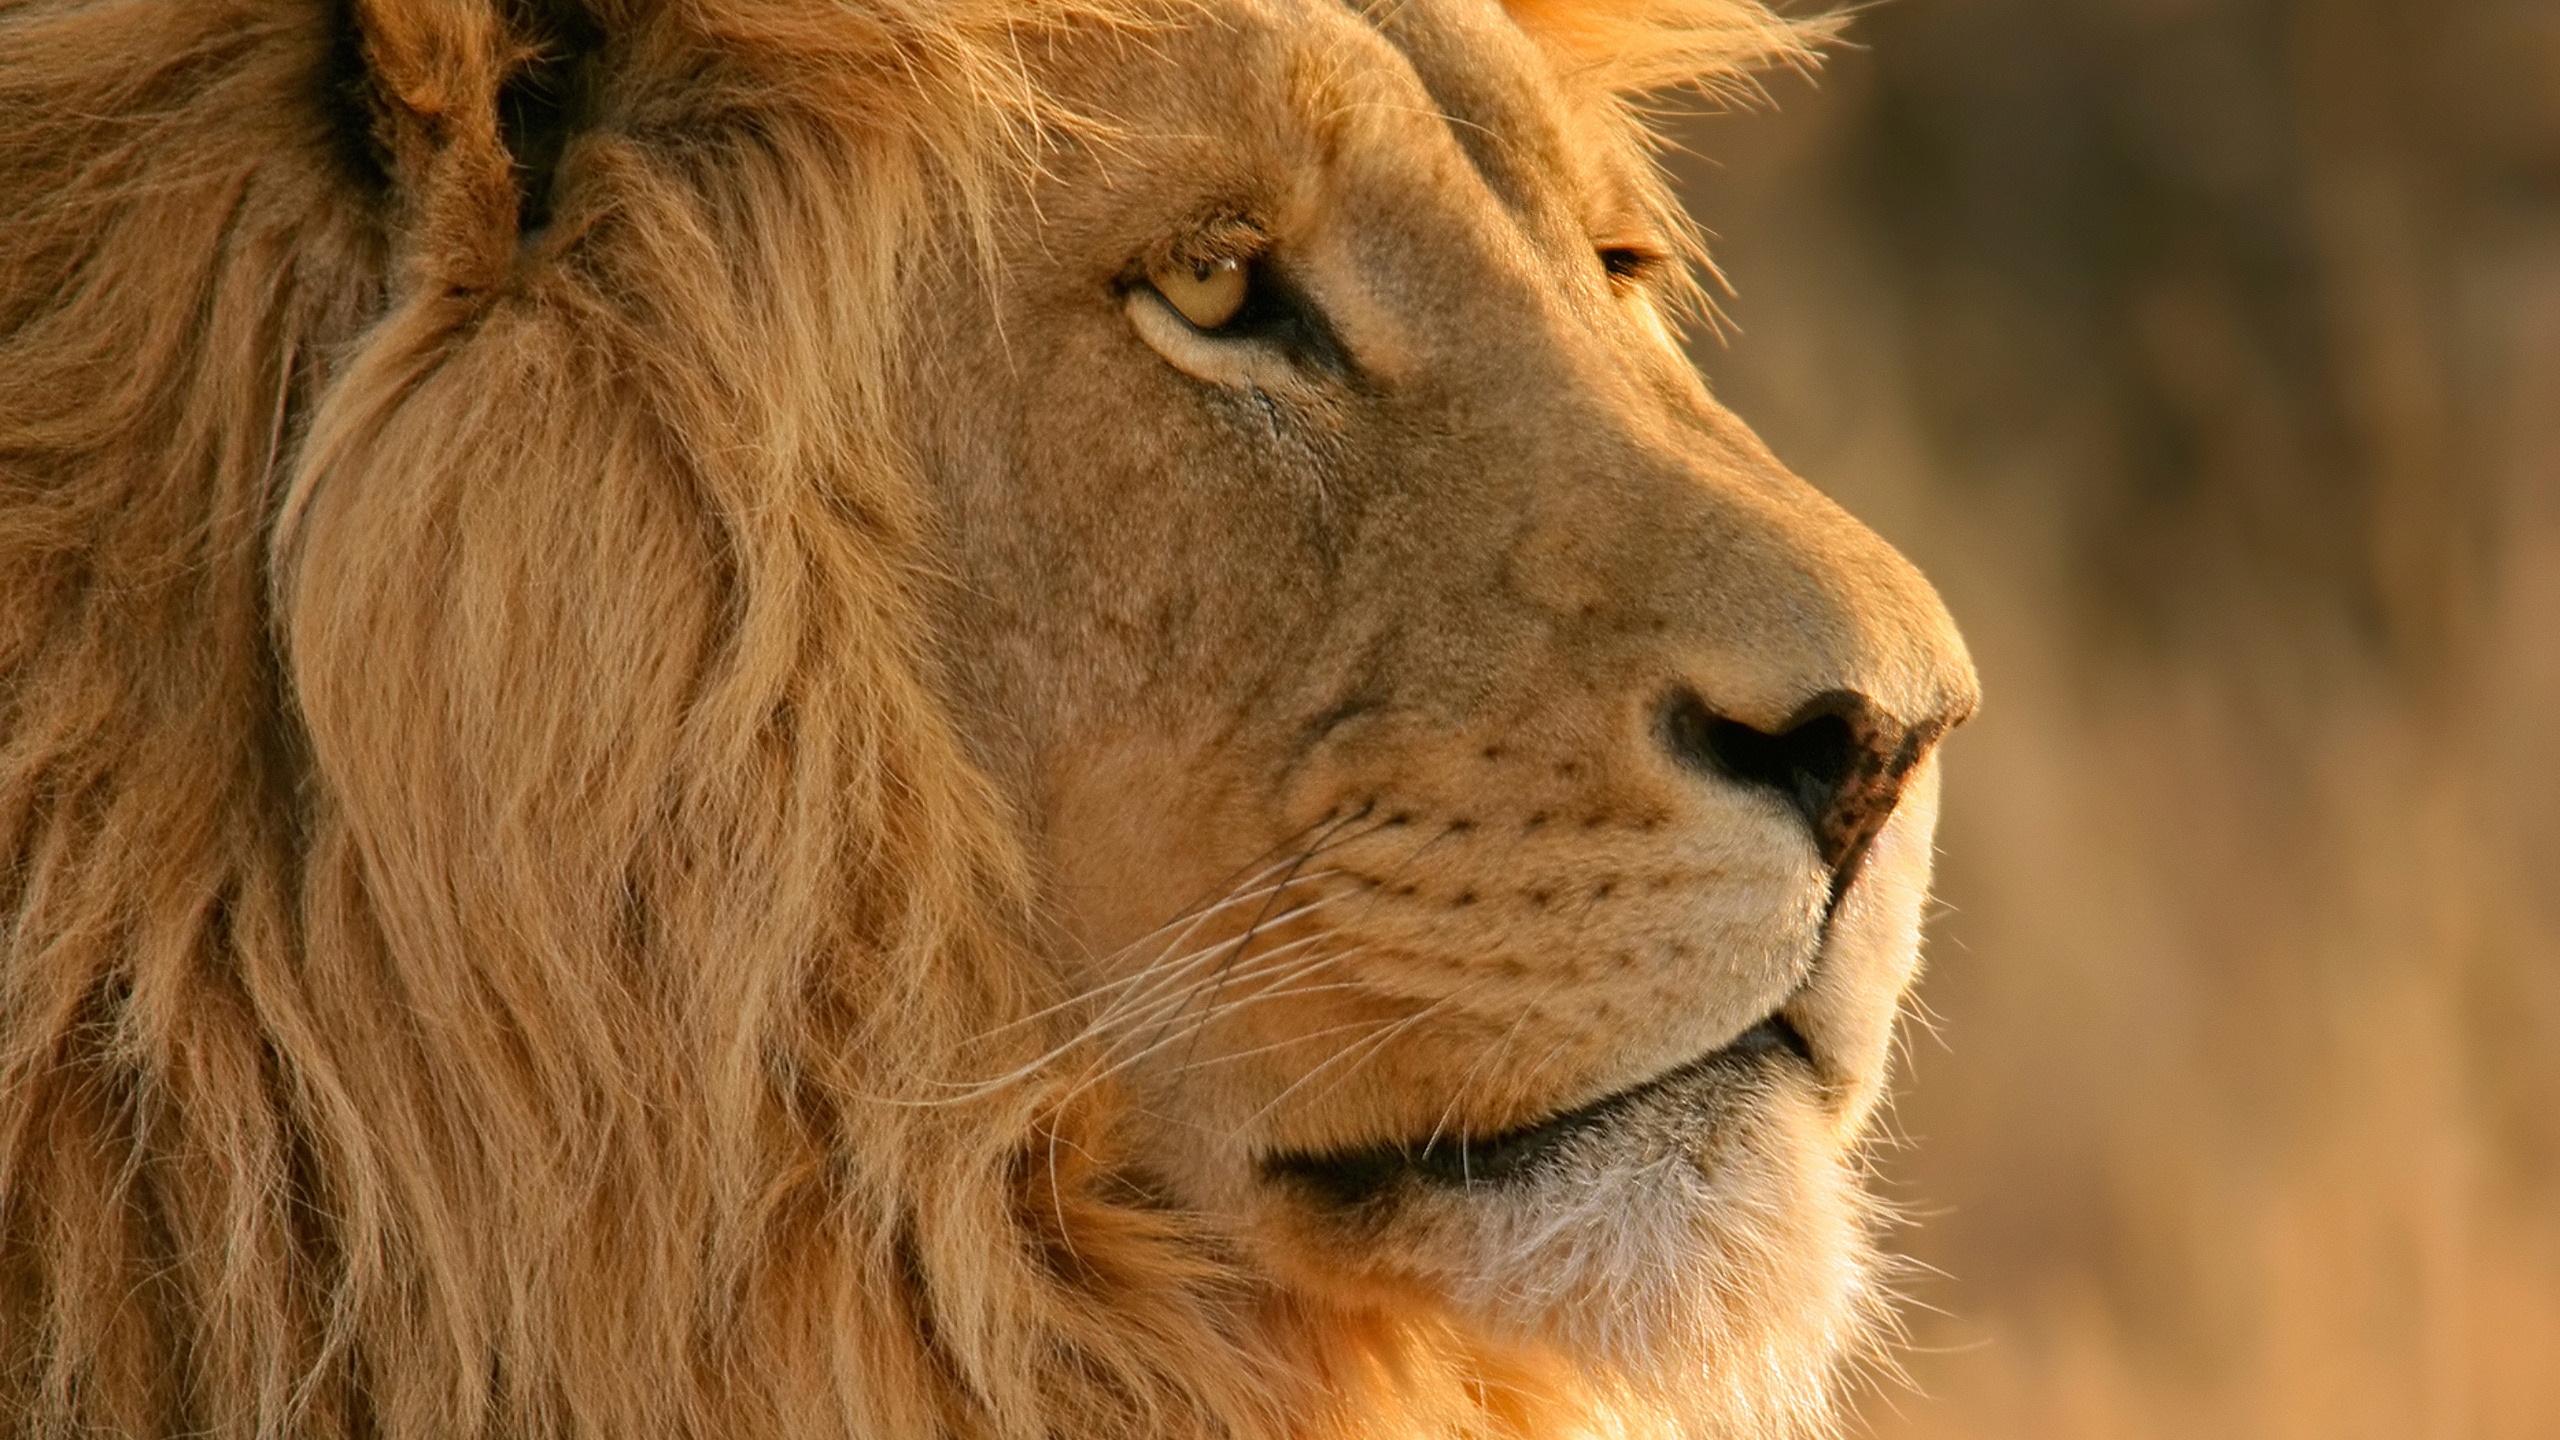 Lion Close Up for 2560x1440 HDTV resolution